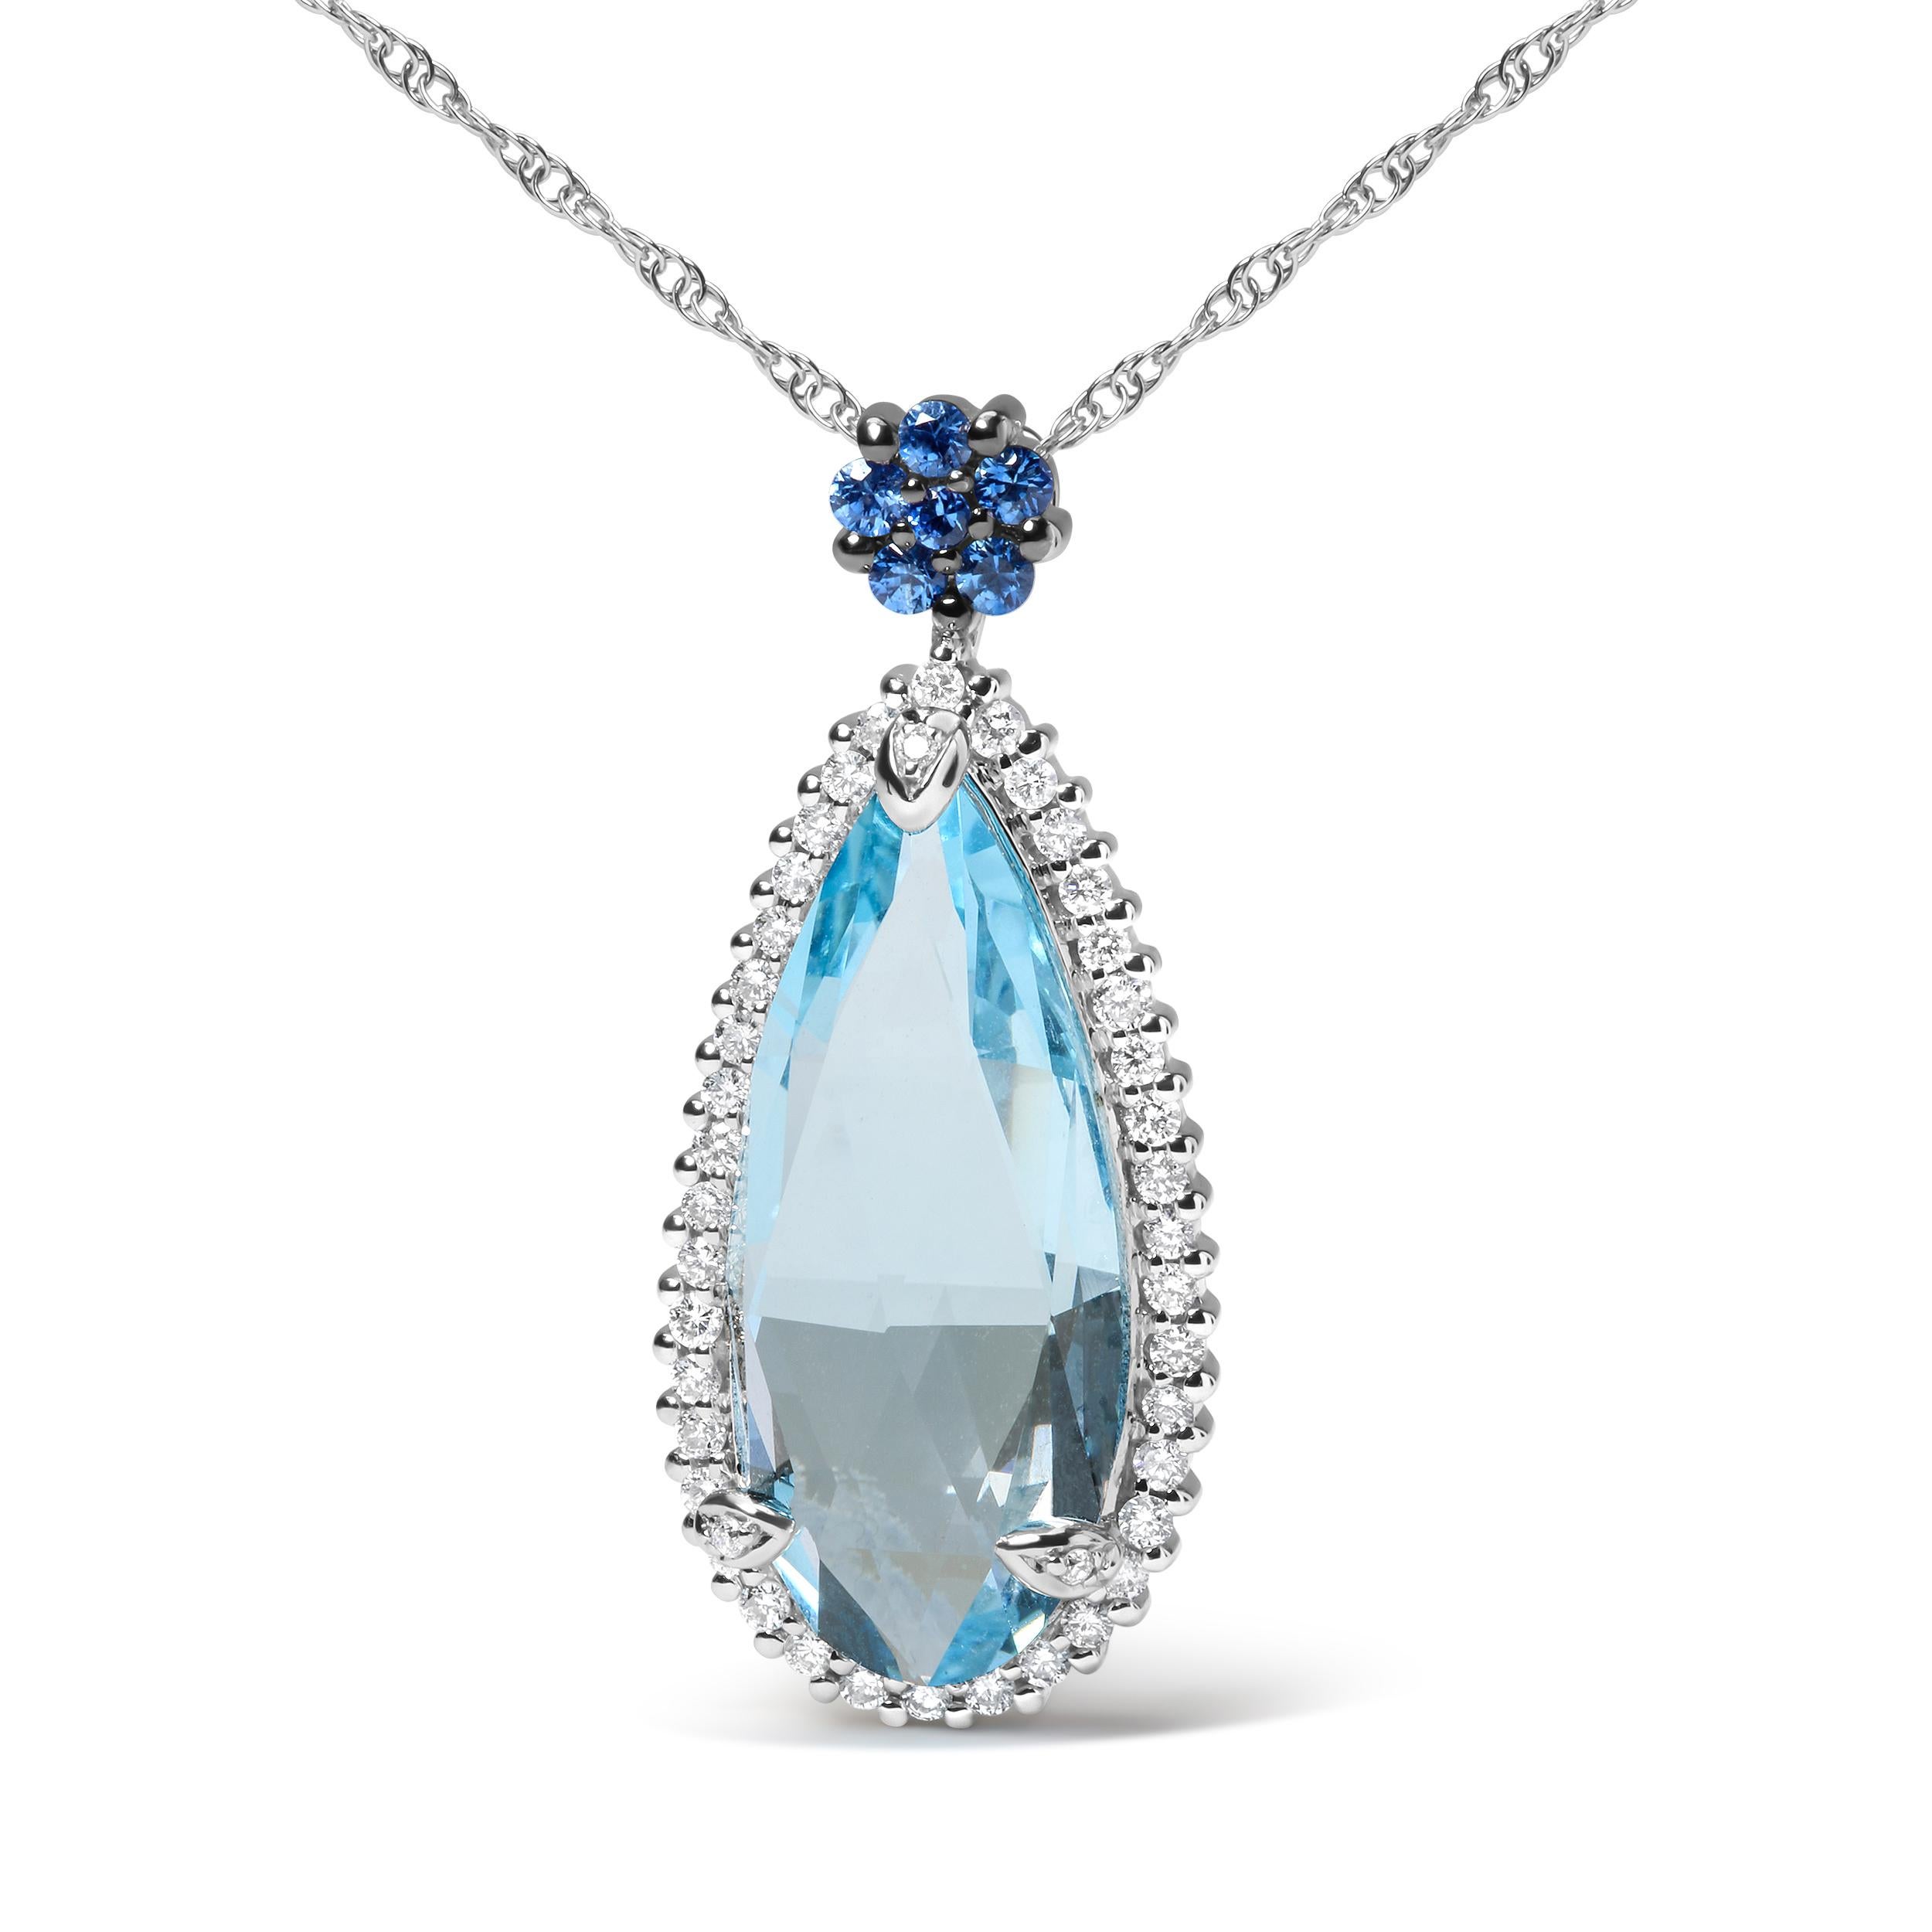 Stand back and let the glory of natural gemstones and diamonds infuse your style with their statement glamour. Made of 18k white gold, this necklace starts off with a bail made of 1.8mm round blue sapphires clustered into a floral silhouette within